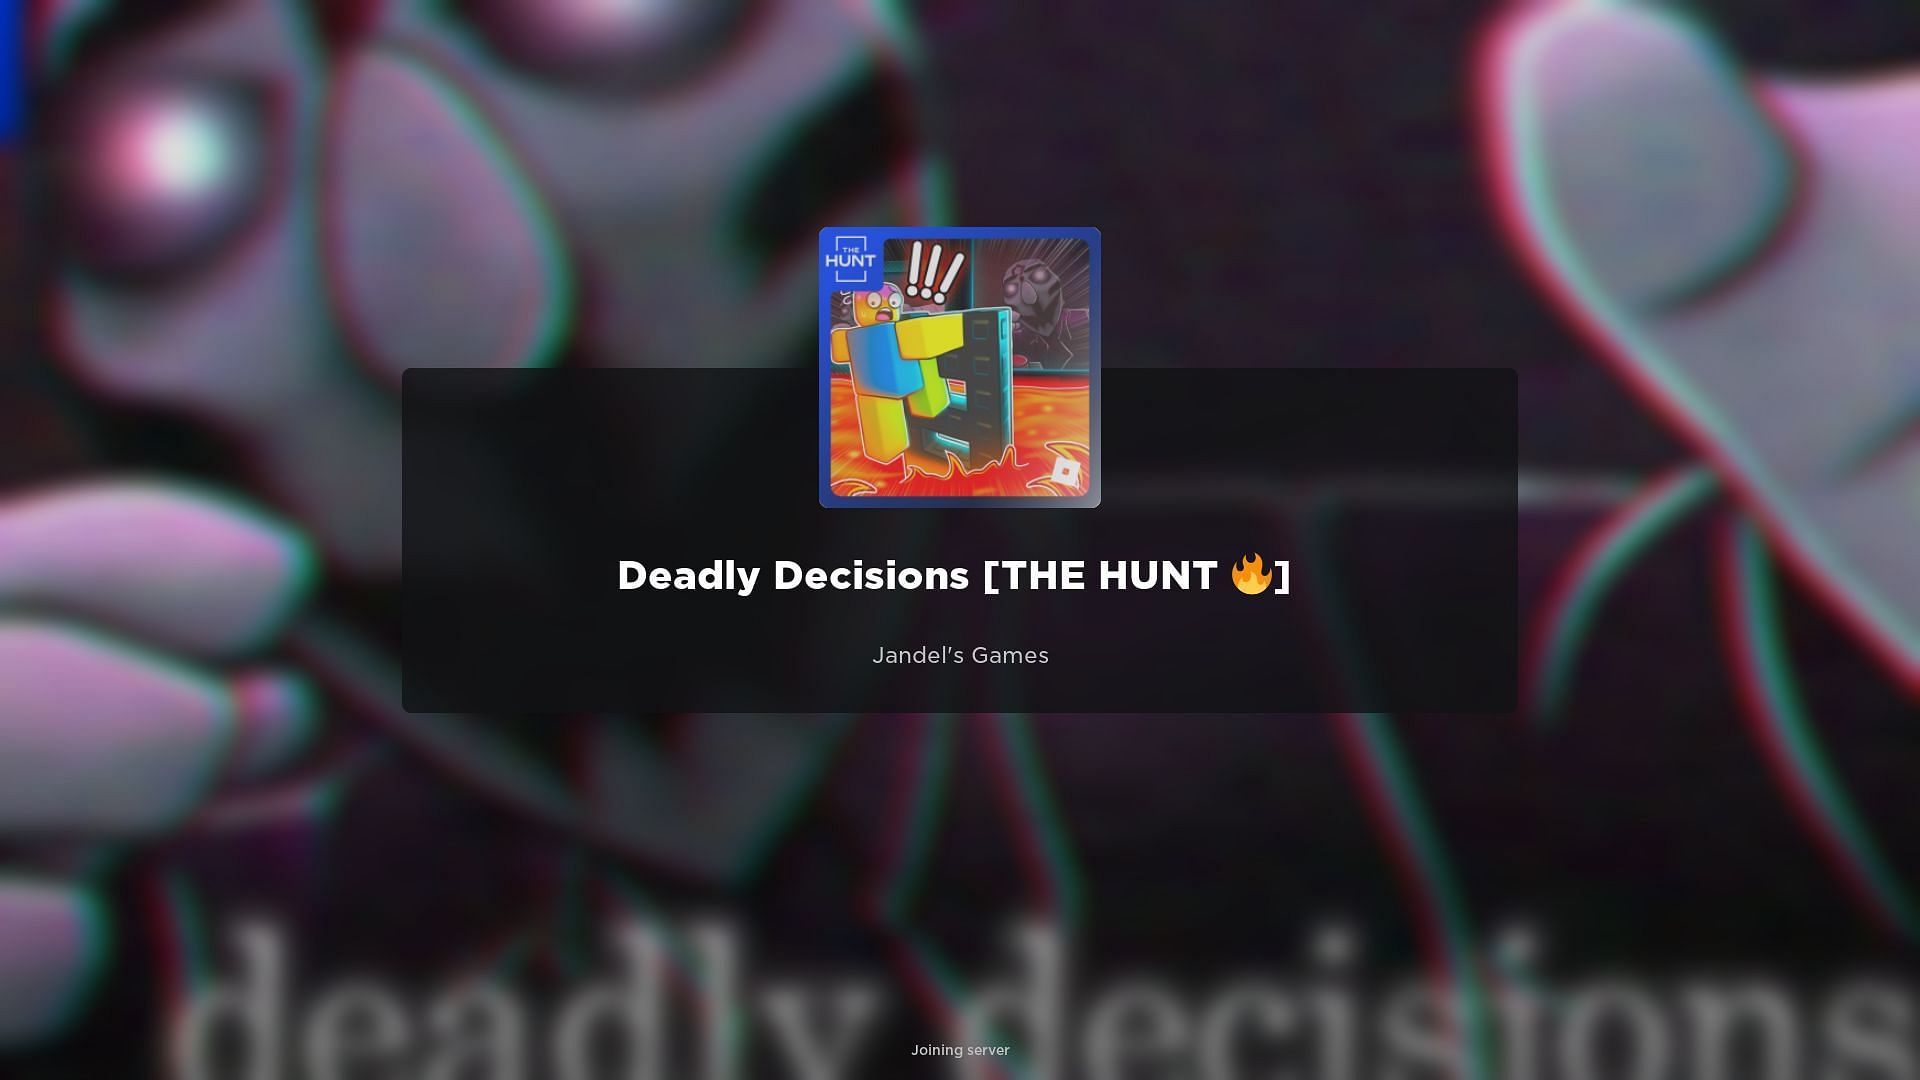 The Hunt in Deadly Decisions